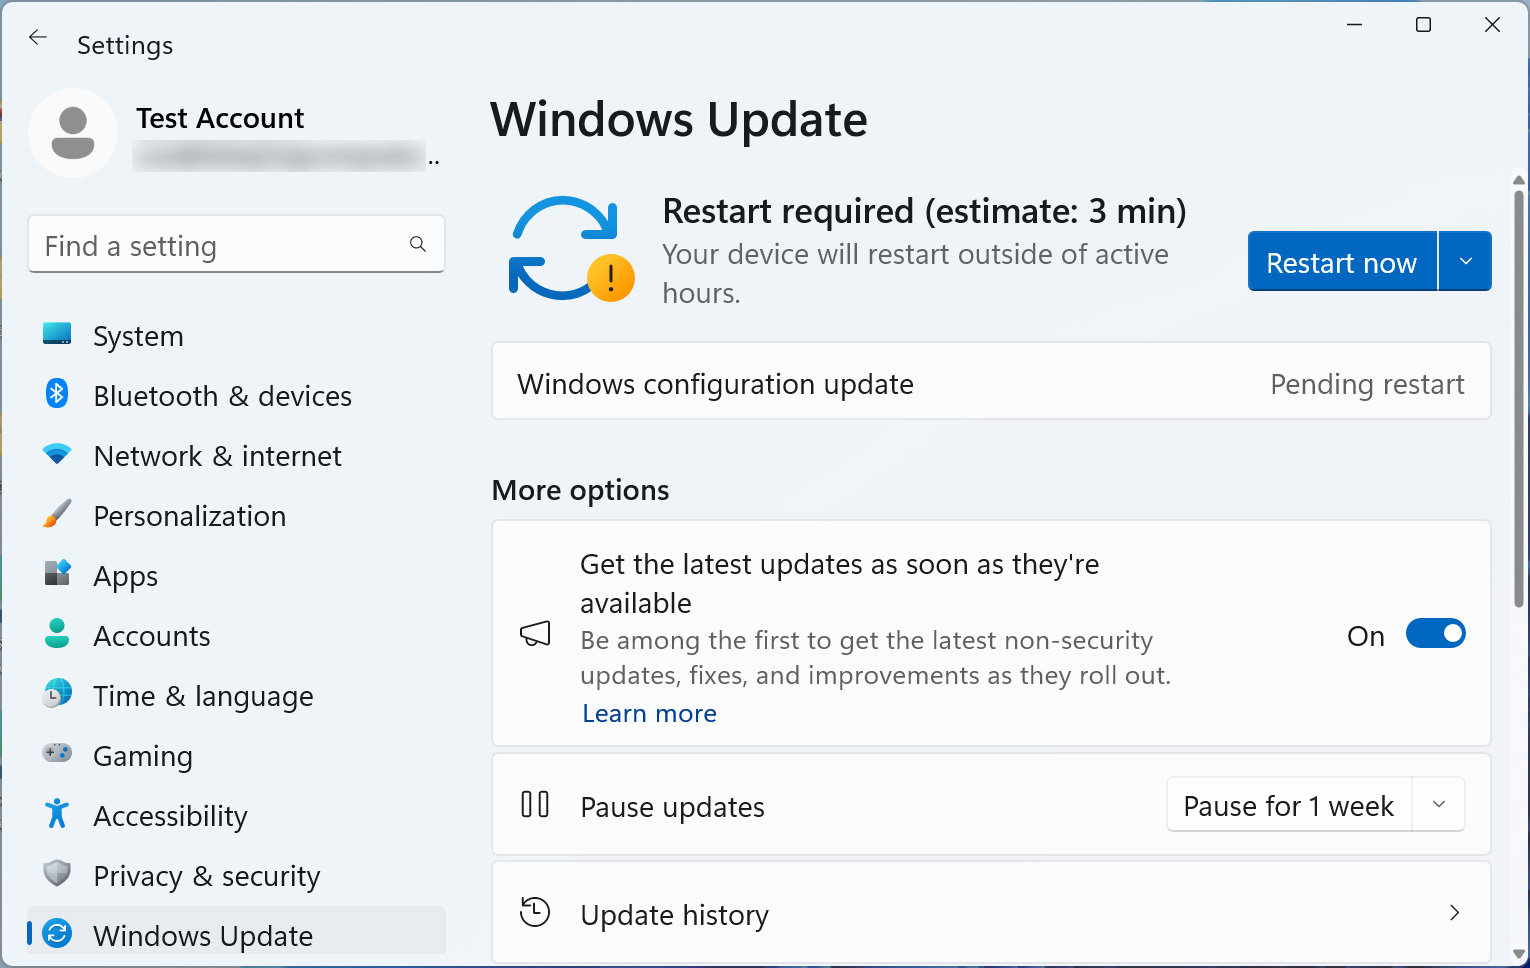 The new Windows 11 configuration update for Moment 3